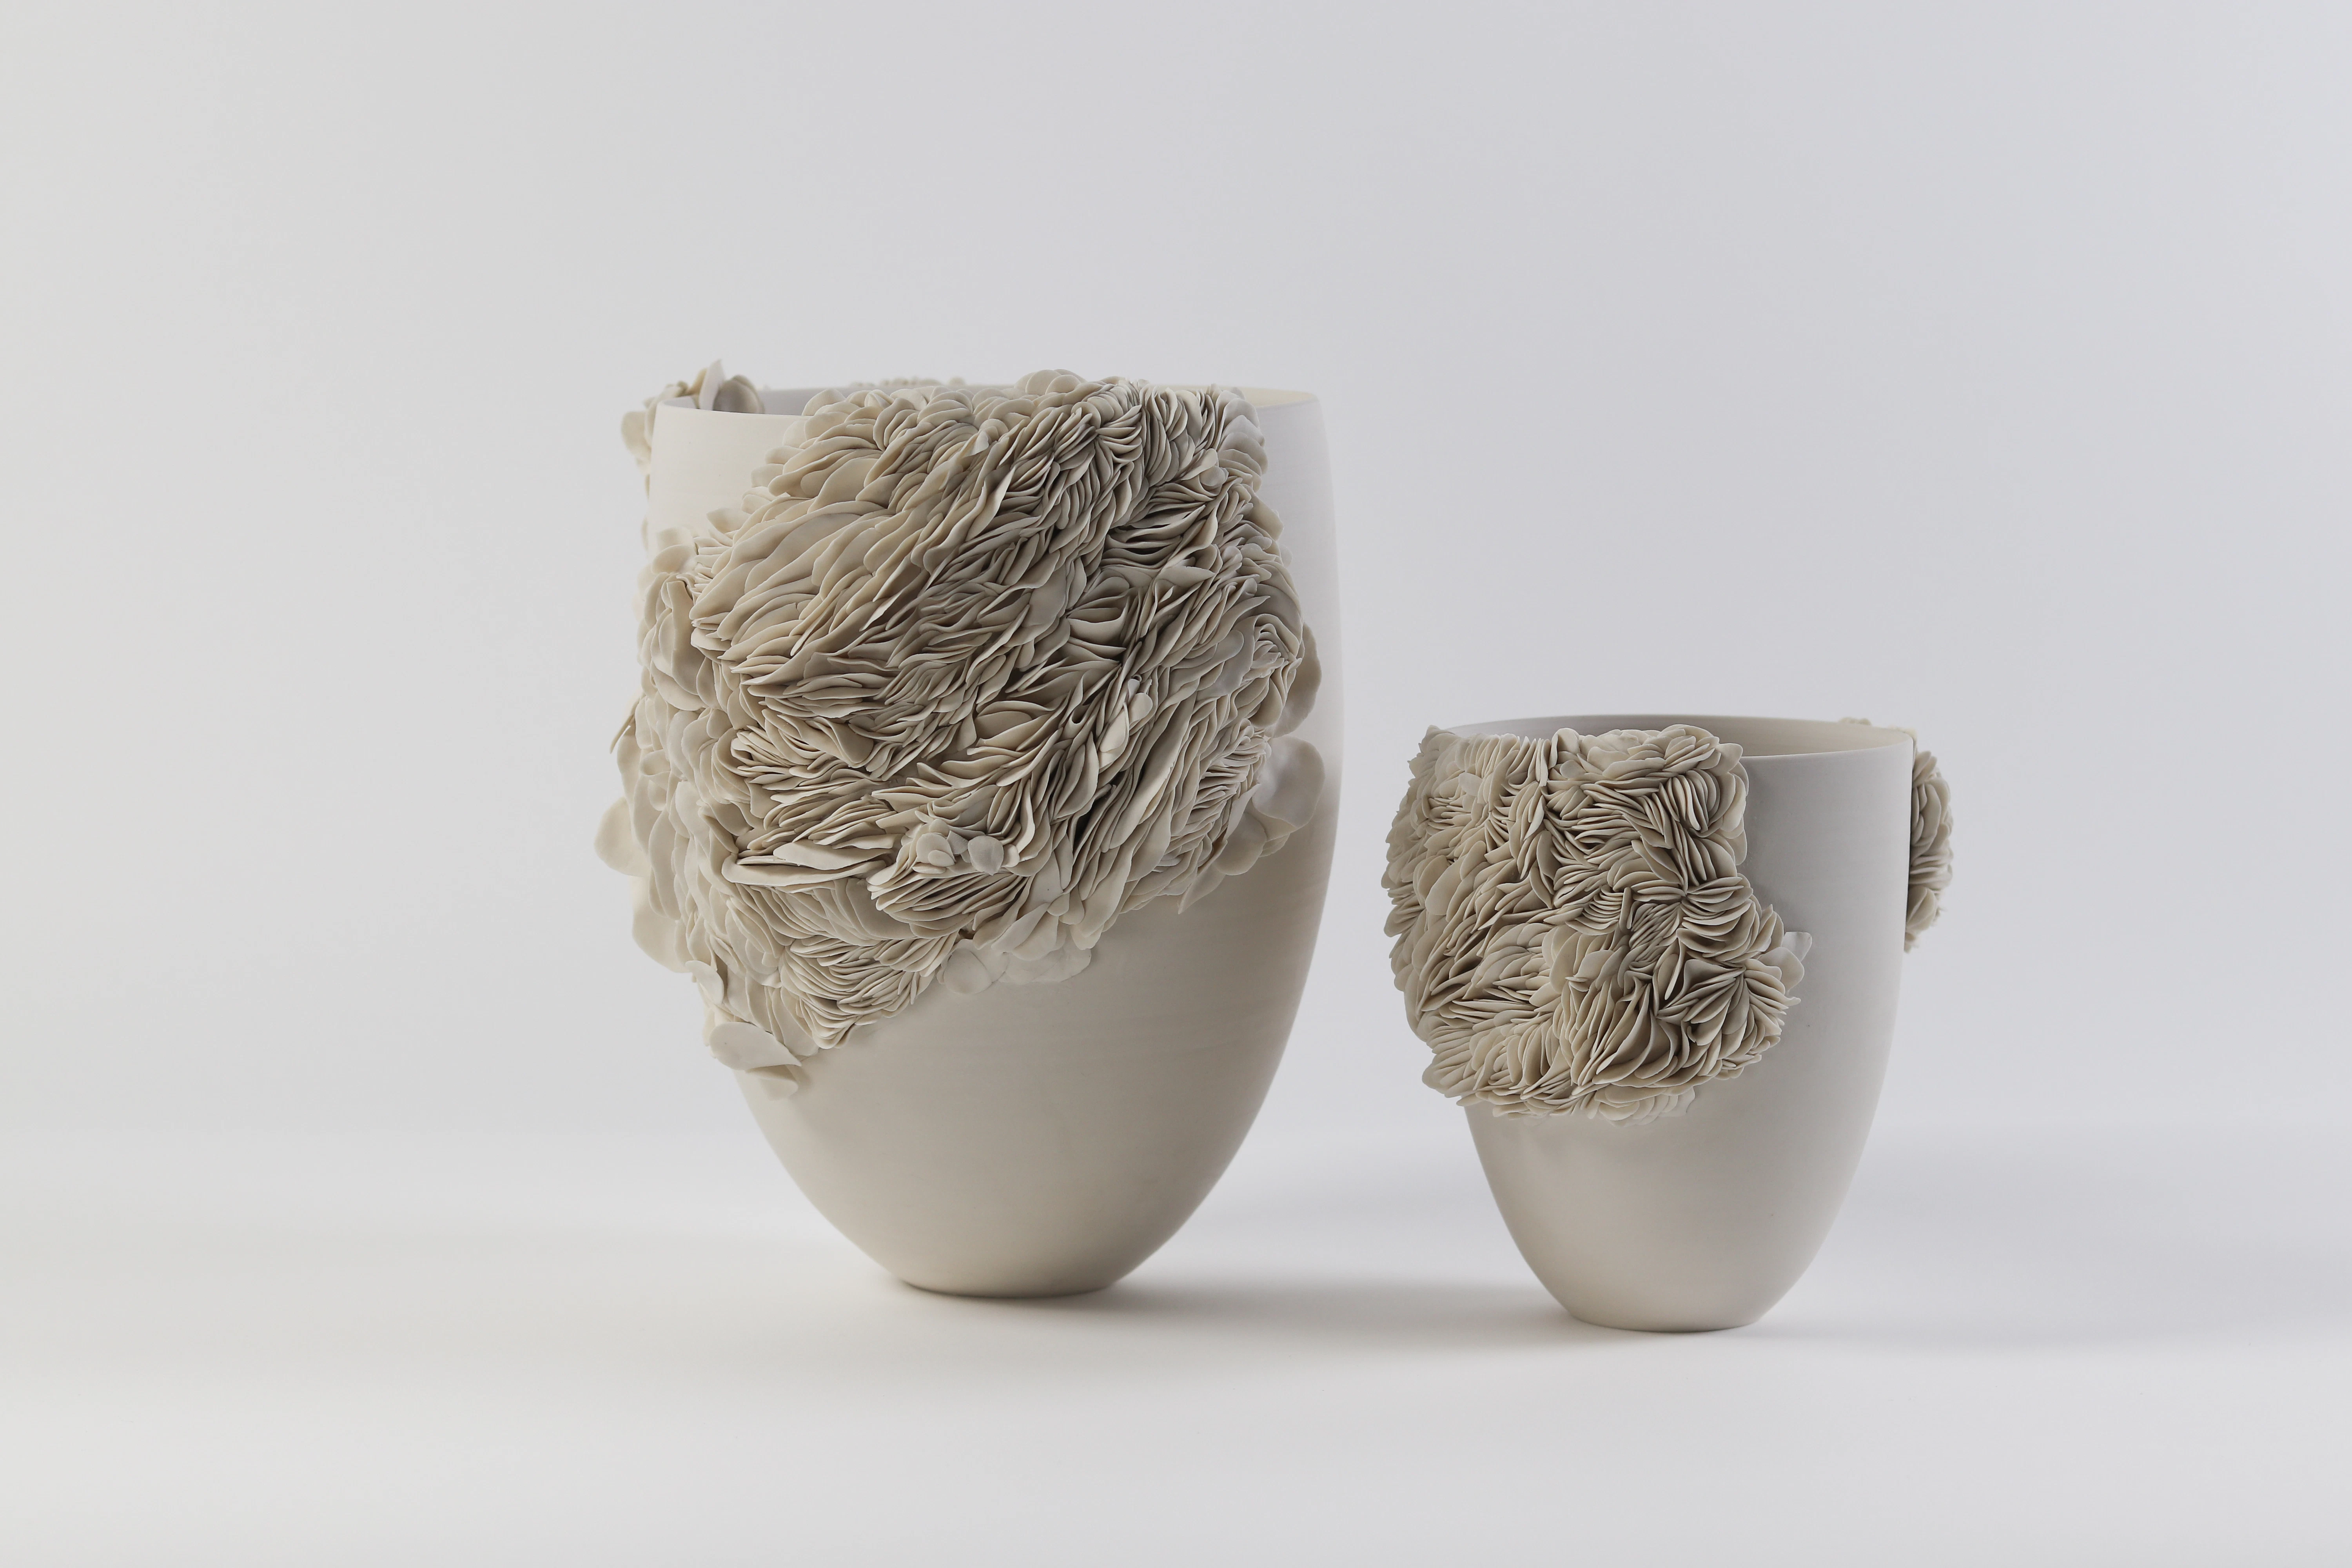 Vessel with texture, collaboration 